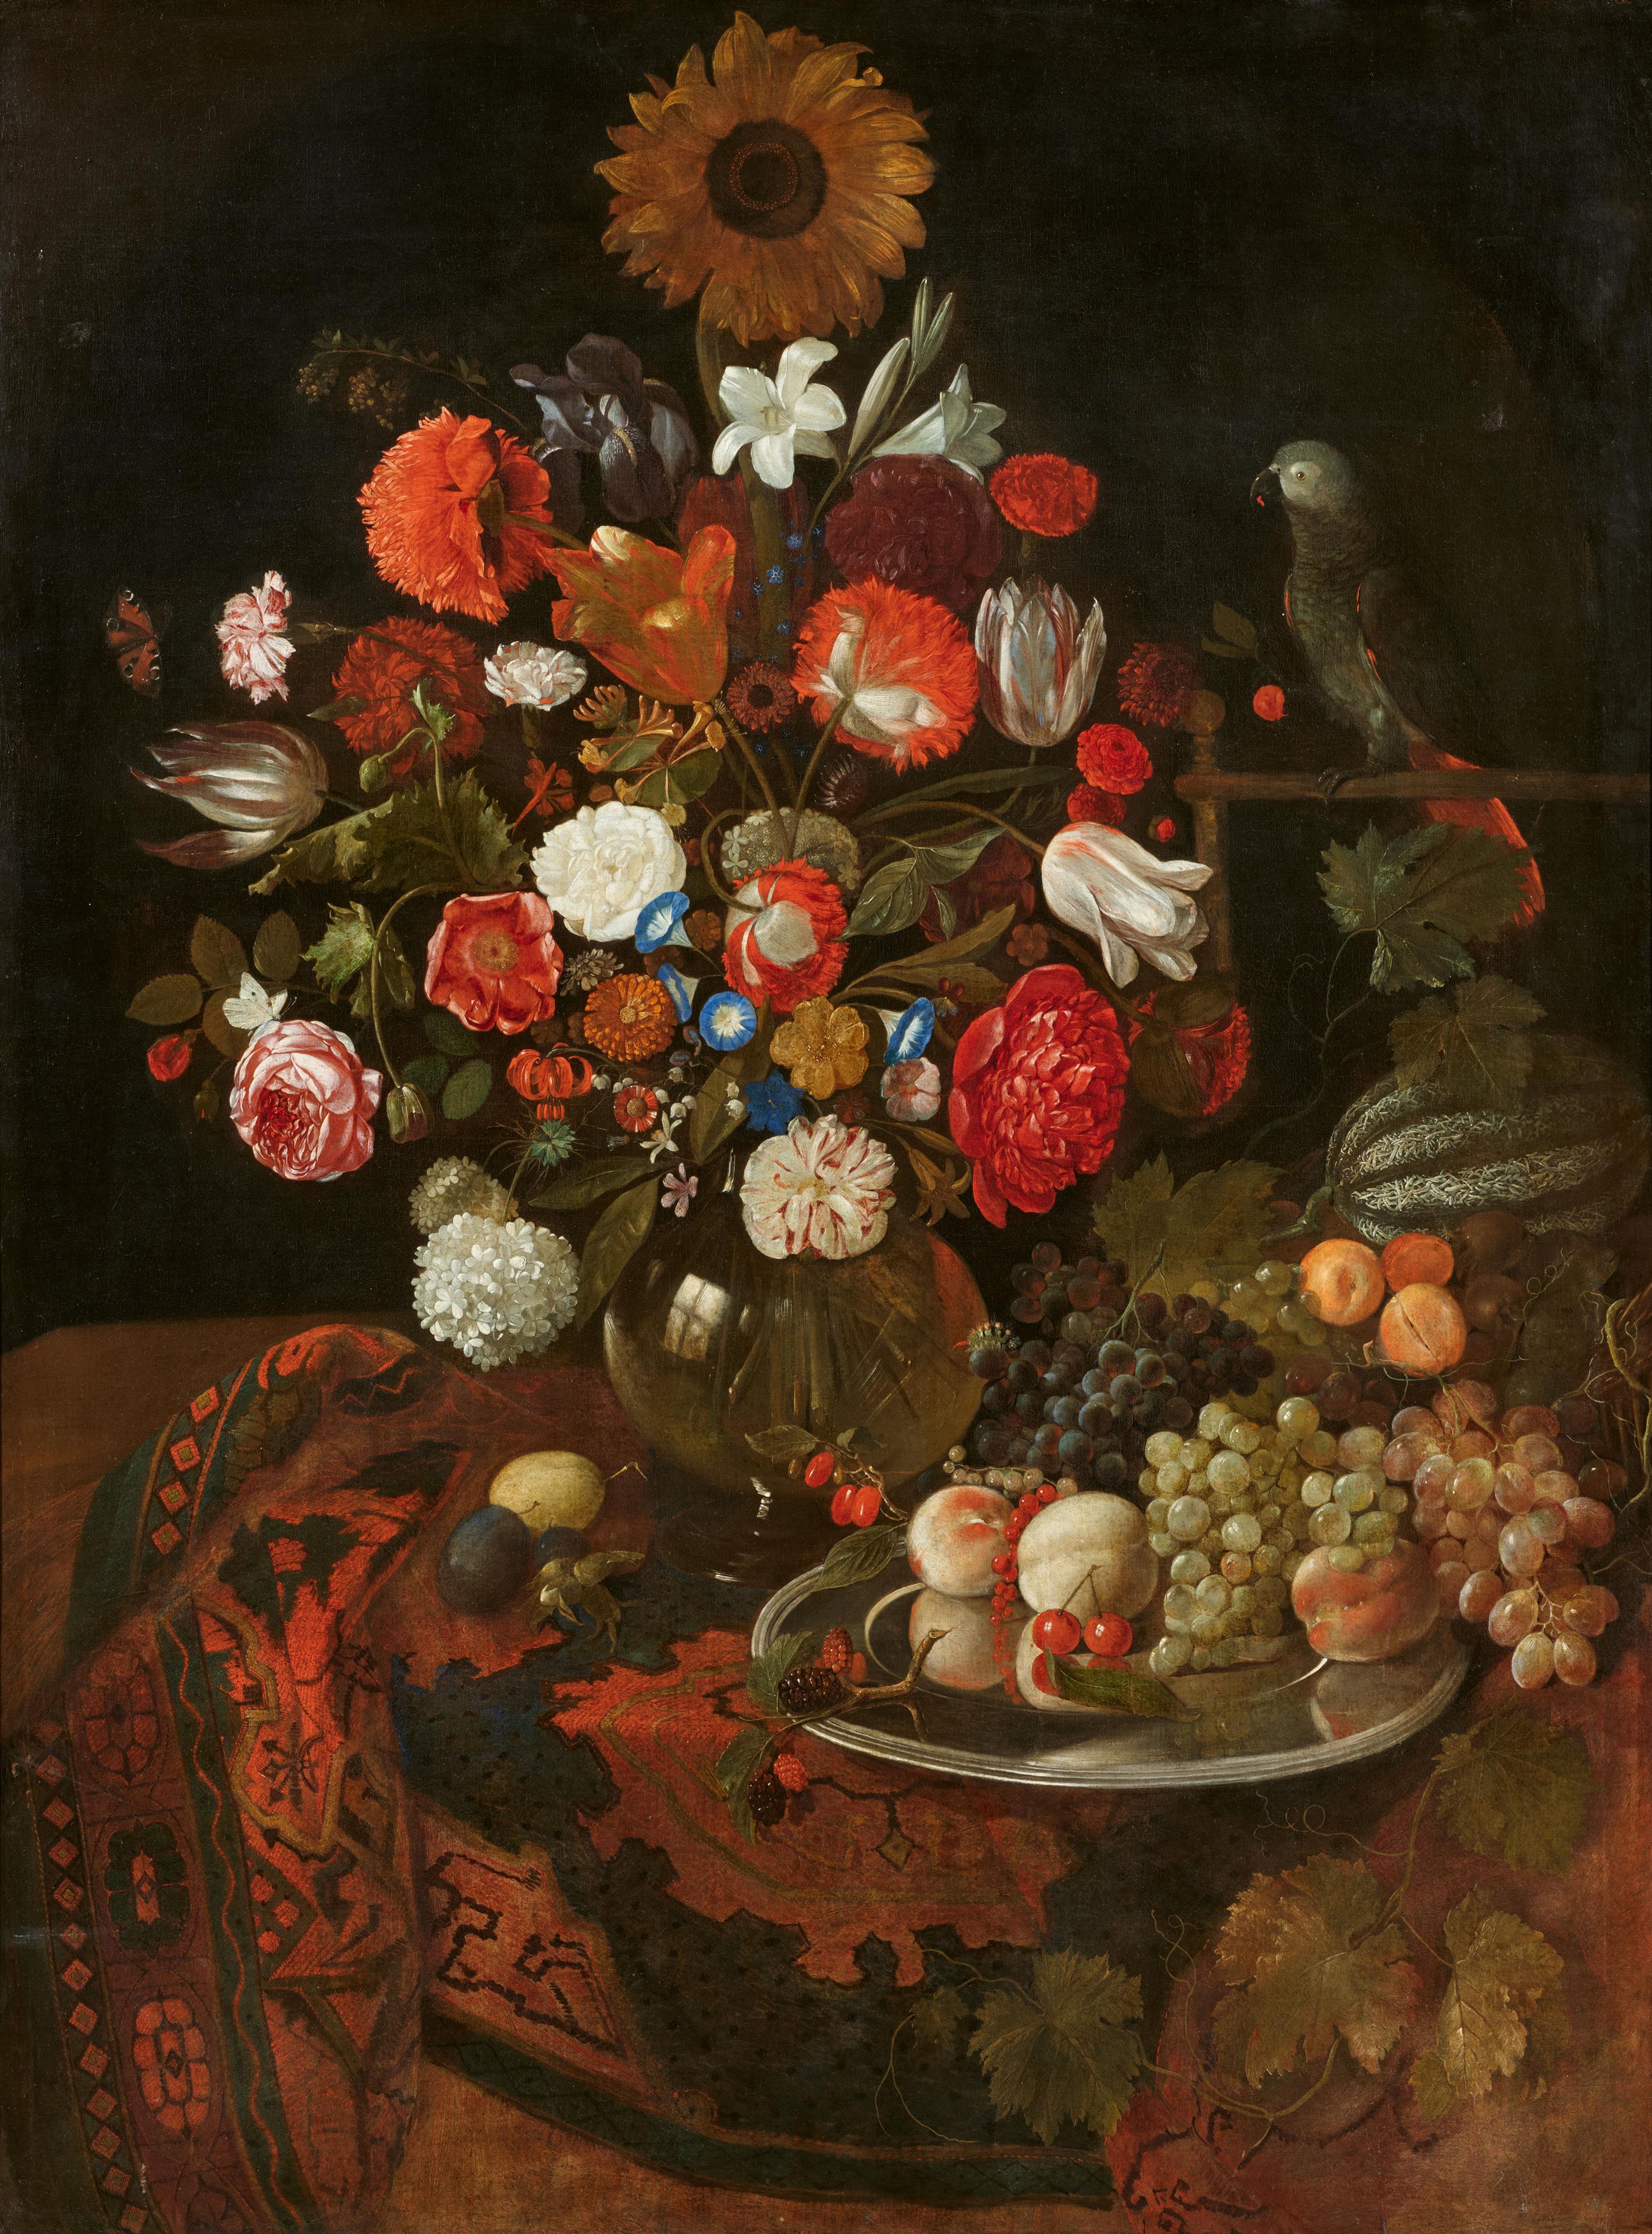 Jakob Rootius - Still Life with Flowers, Fruit and a Parrot - image-1